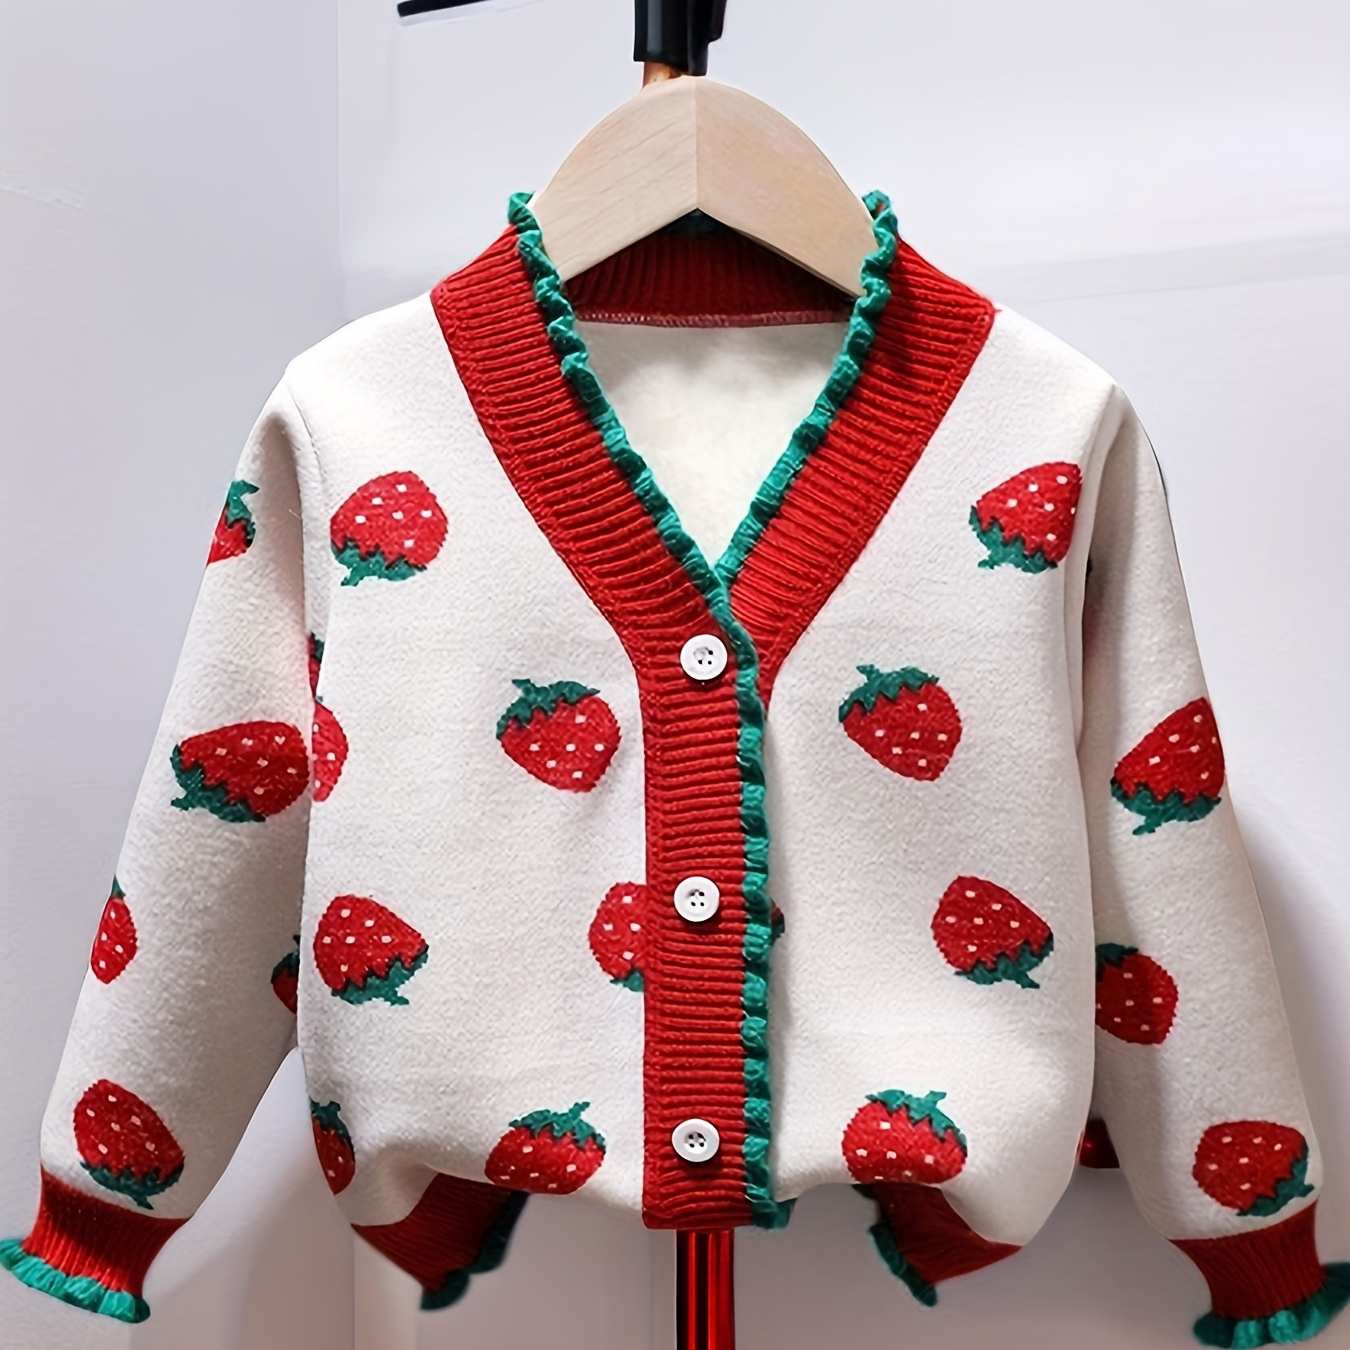 

Girls Button V-neck Knitted Cardigan With Cute Strawberry Jacquard, Kids Long Sleeve Knit Cardigan Sweater